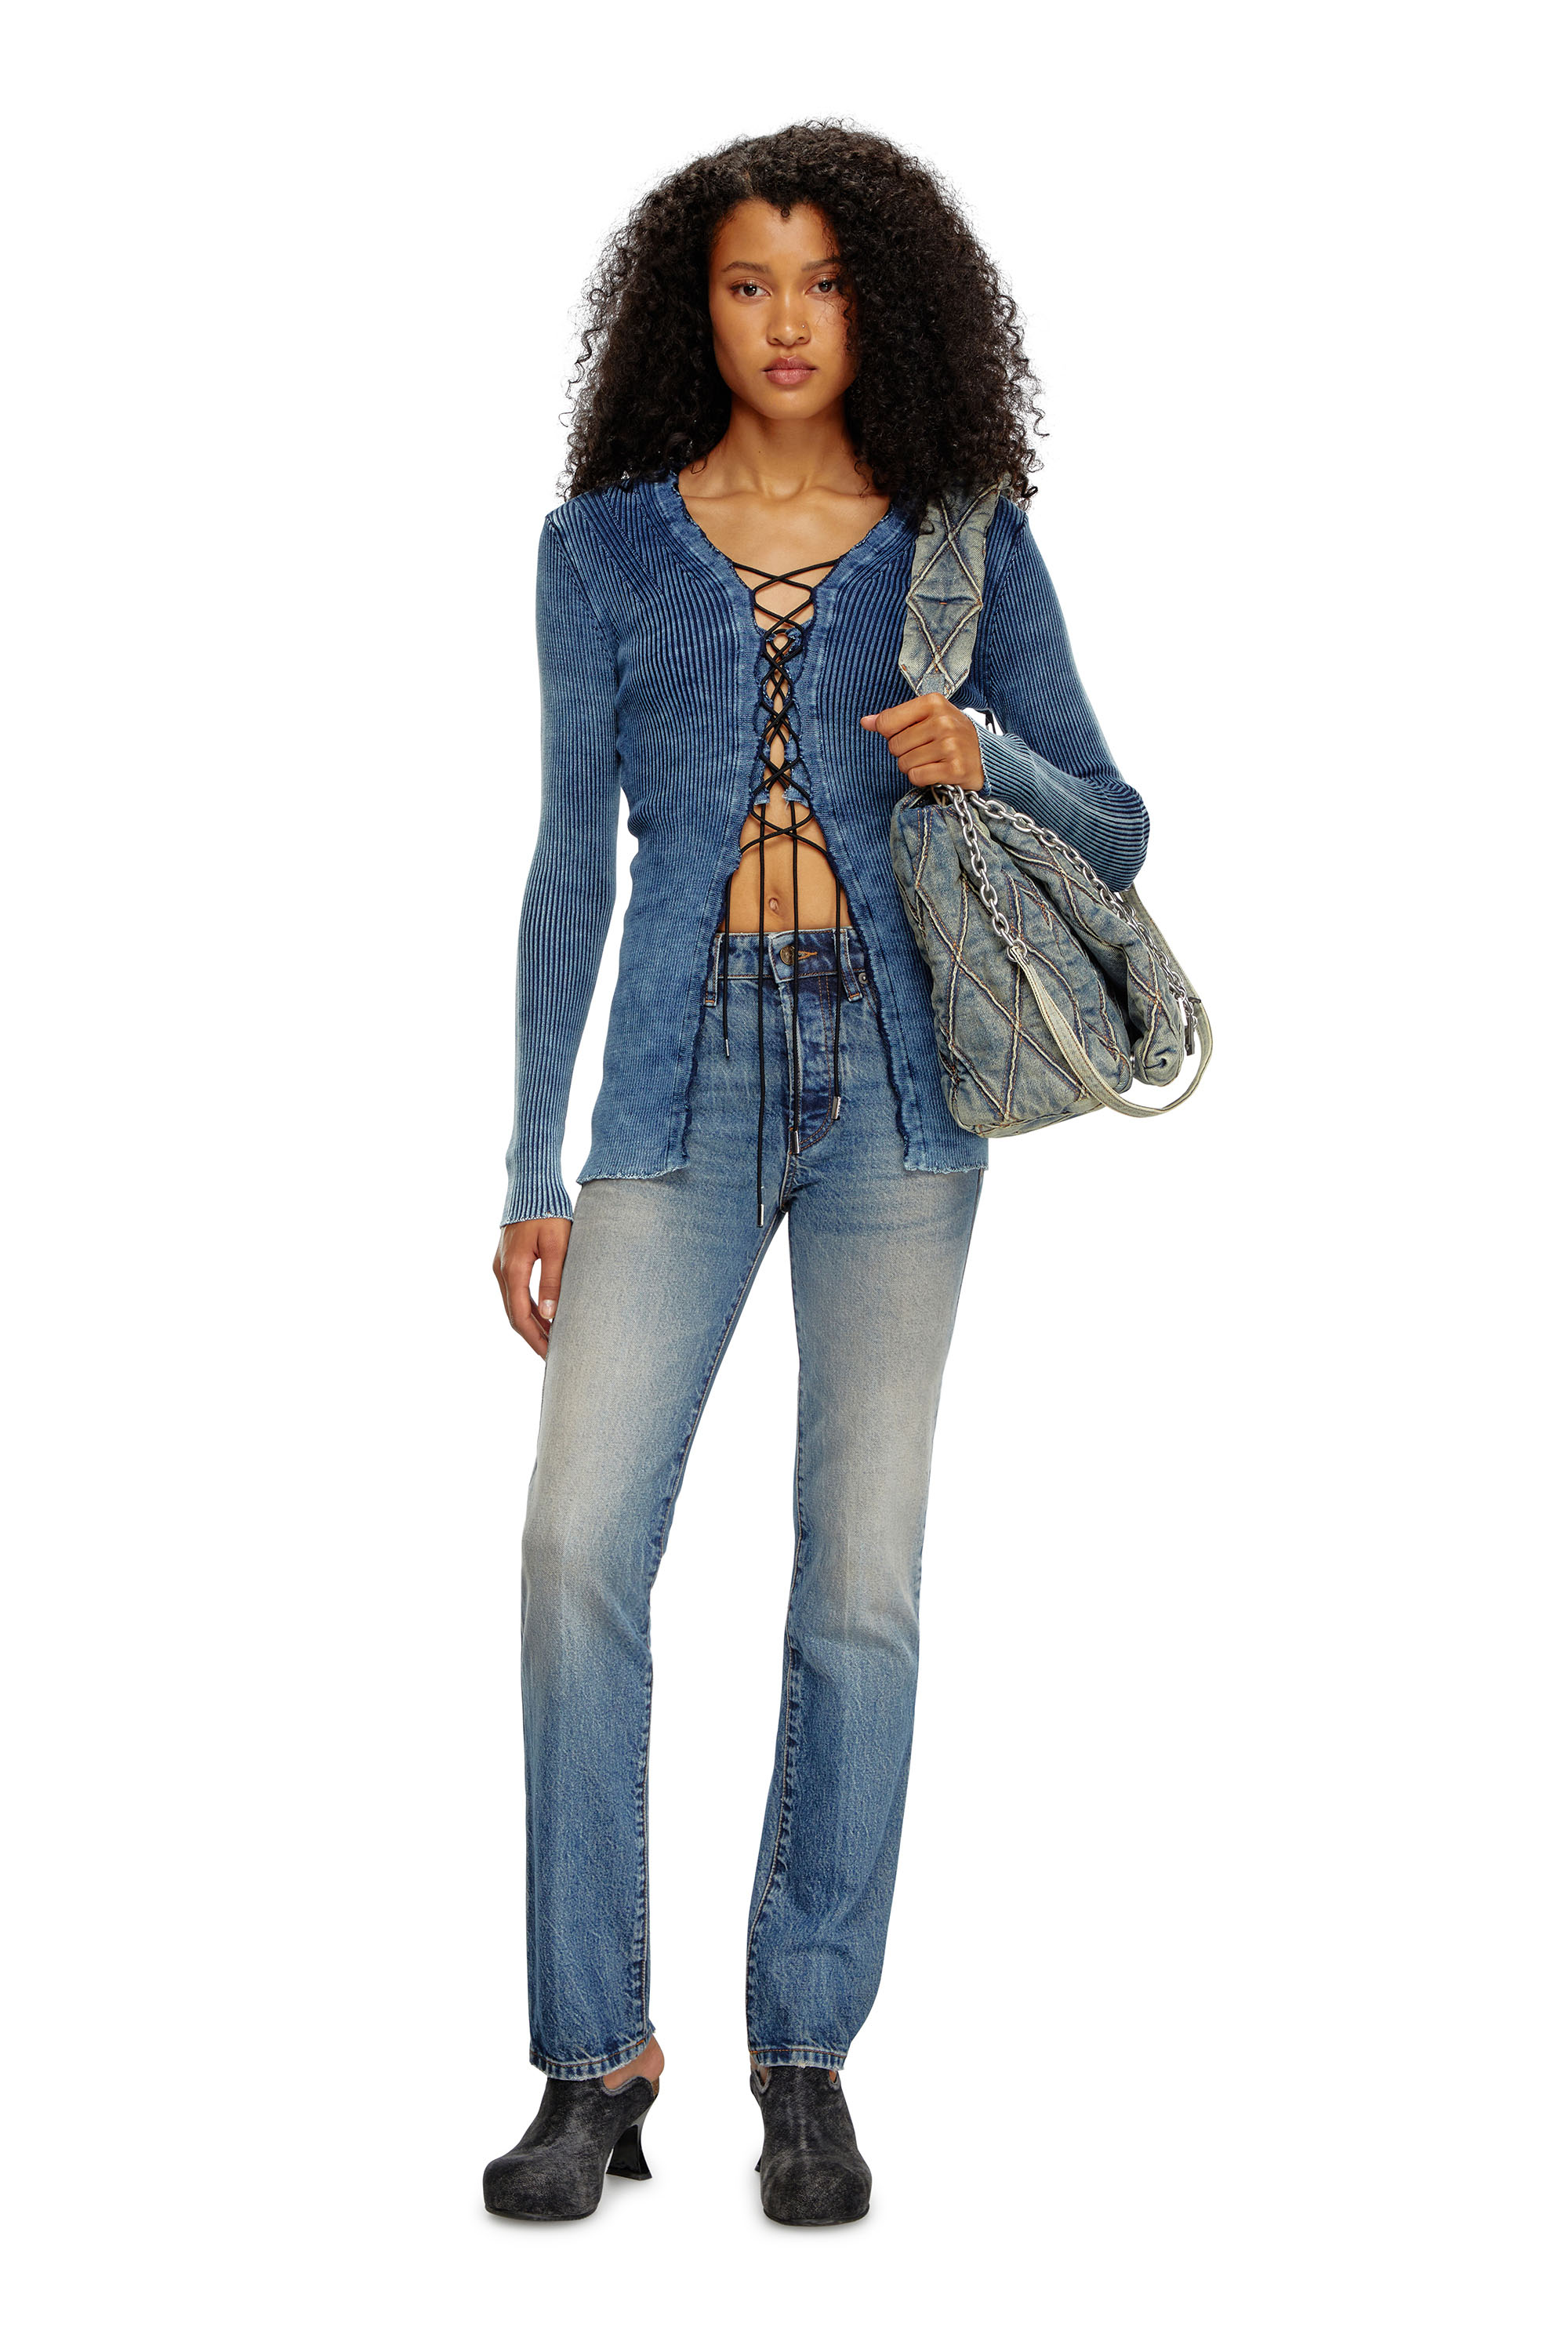 Diesel - Straight Jeans 1989 D-Mine 0GRDH, Mujer Straight Jeans - 1989 D-Mine in Azul marino - Image 2